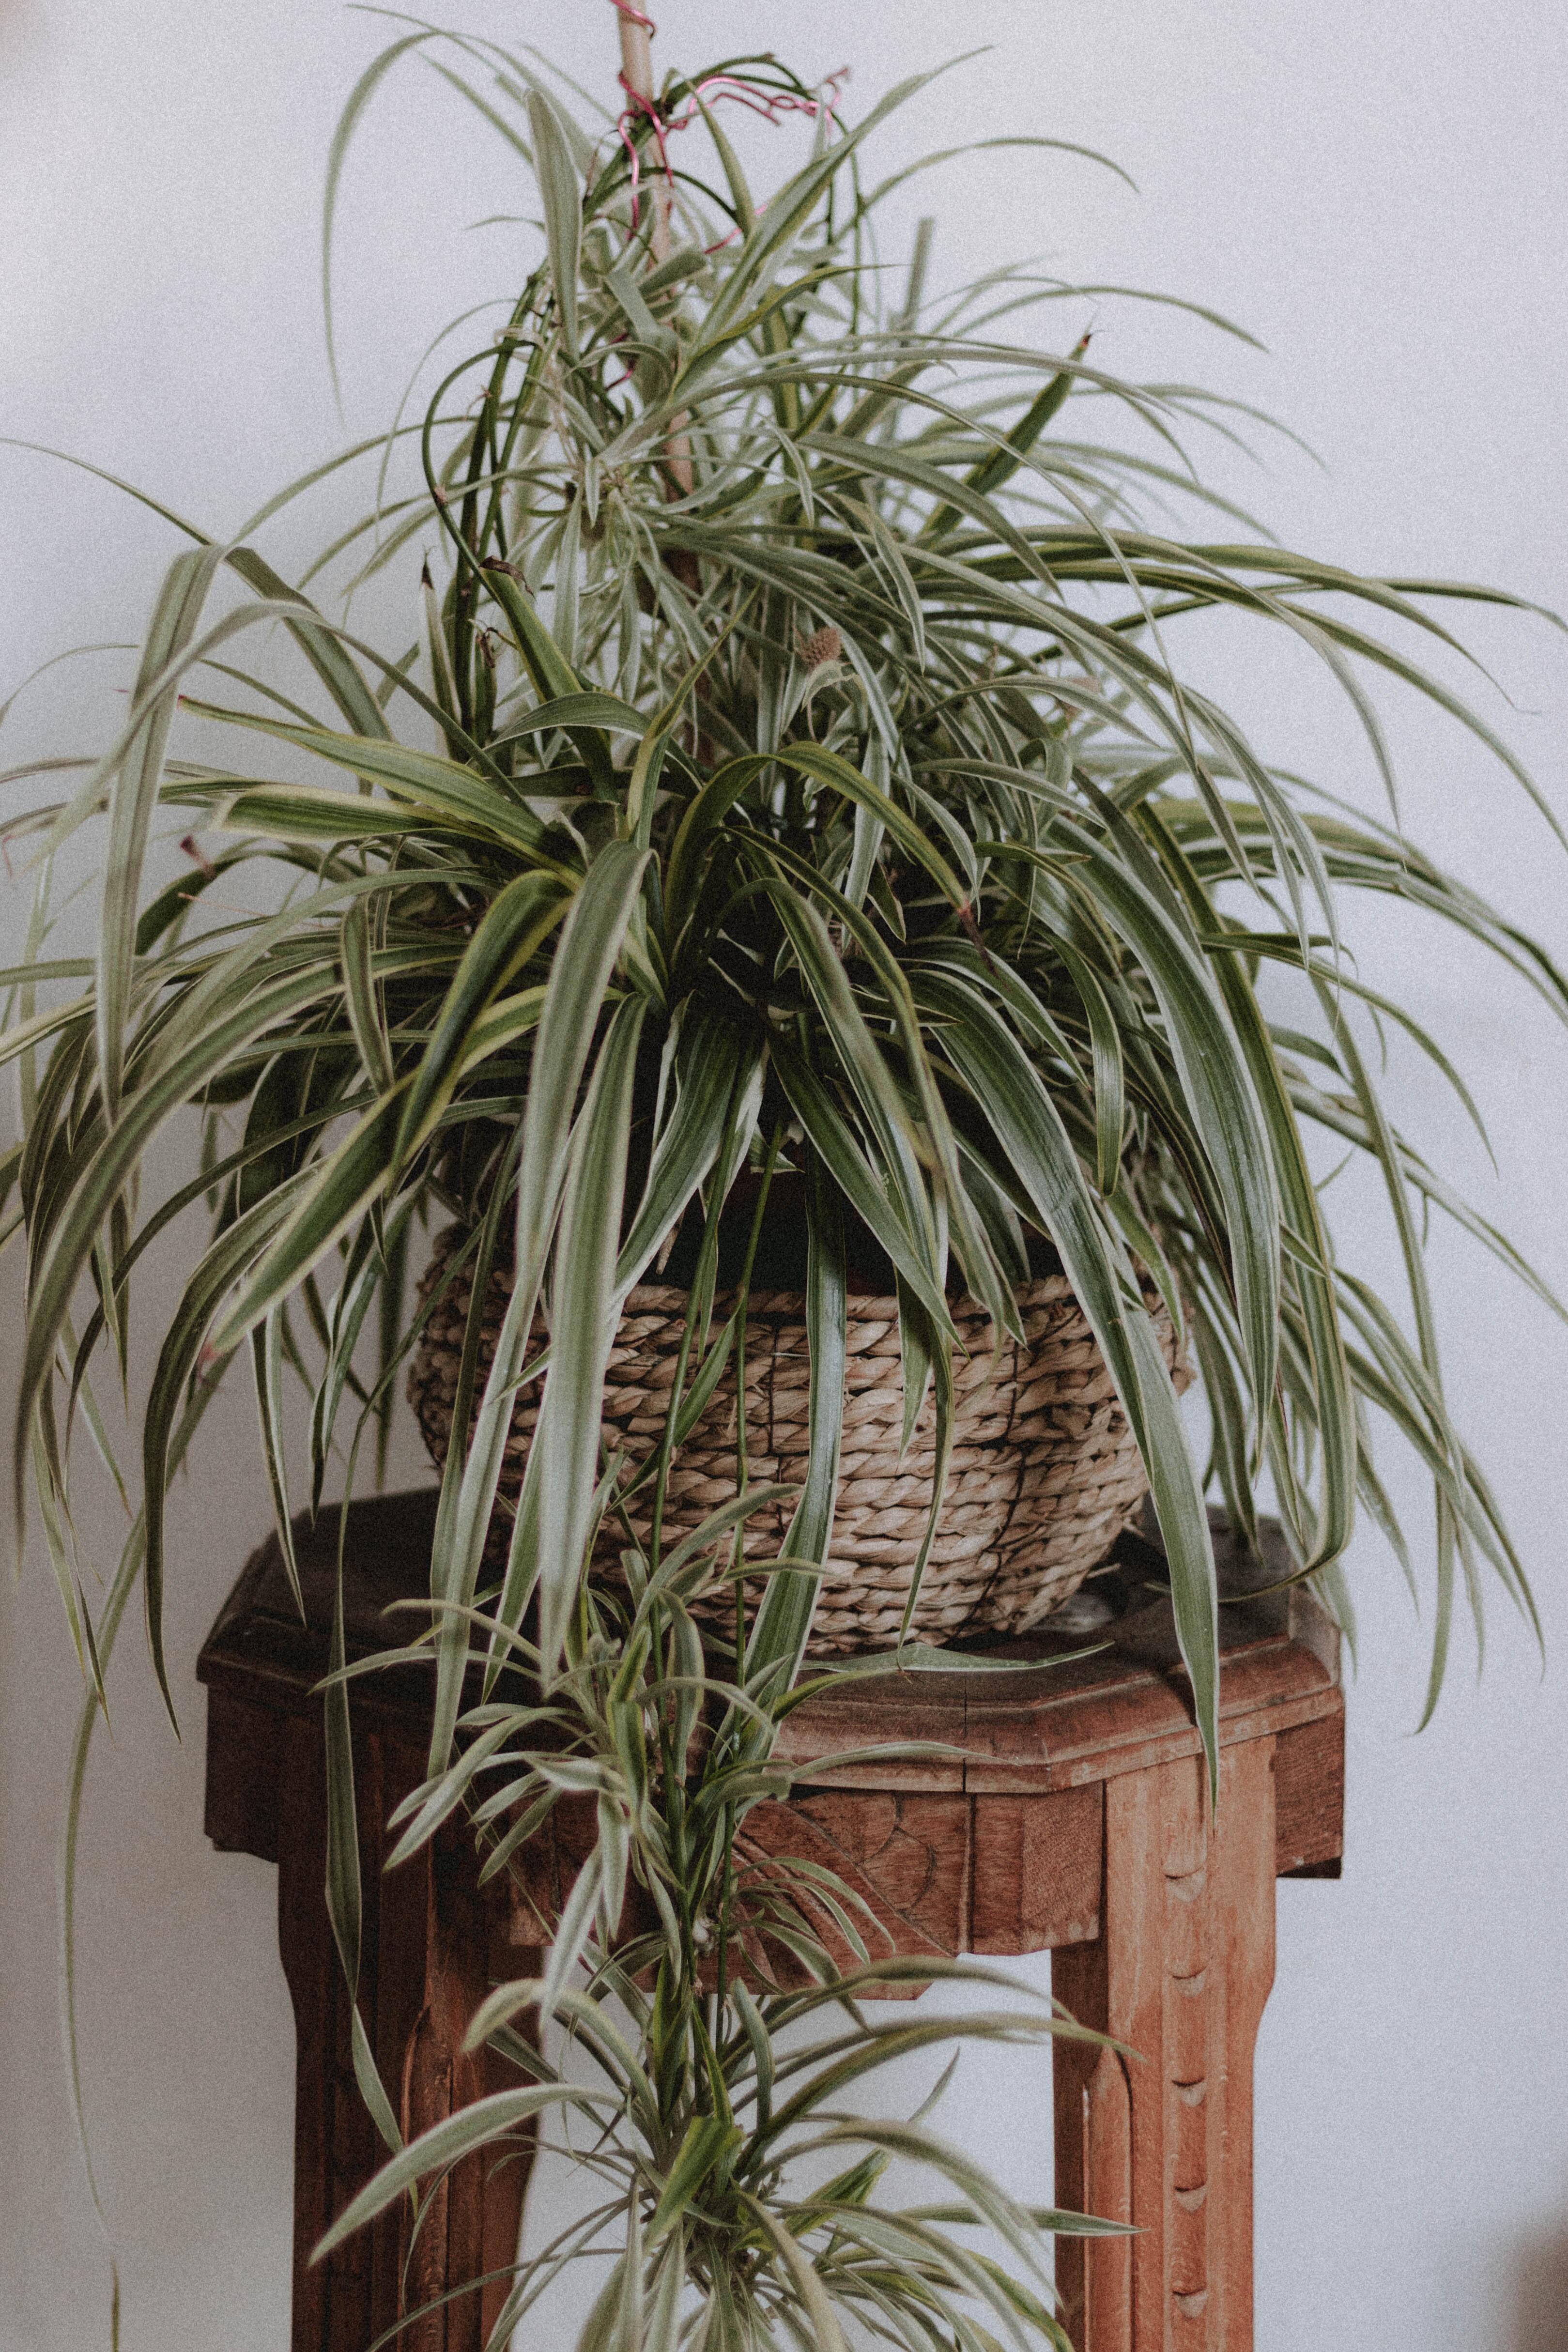 The Spider Plant is a non-toxic pet-friendly plant with long, papery green leaves.